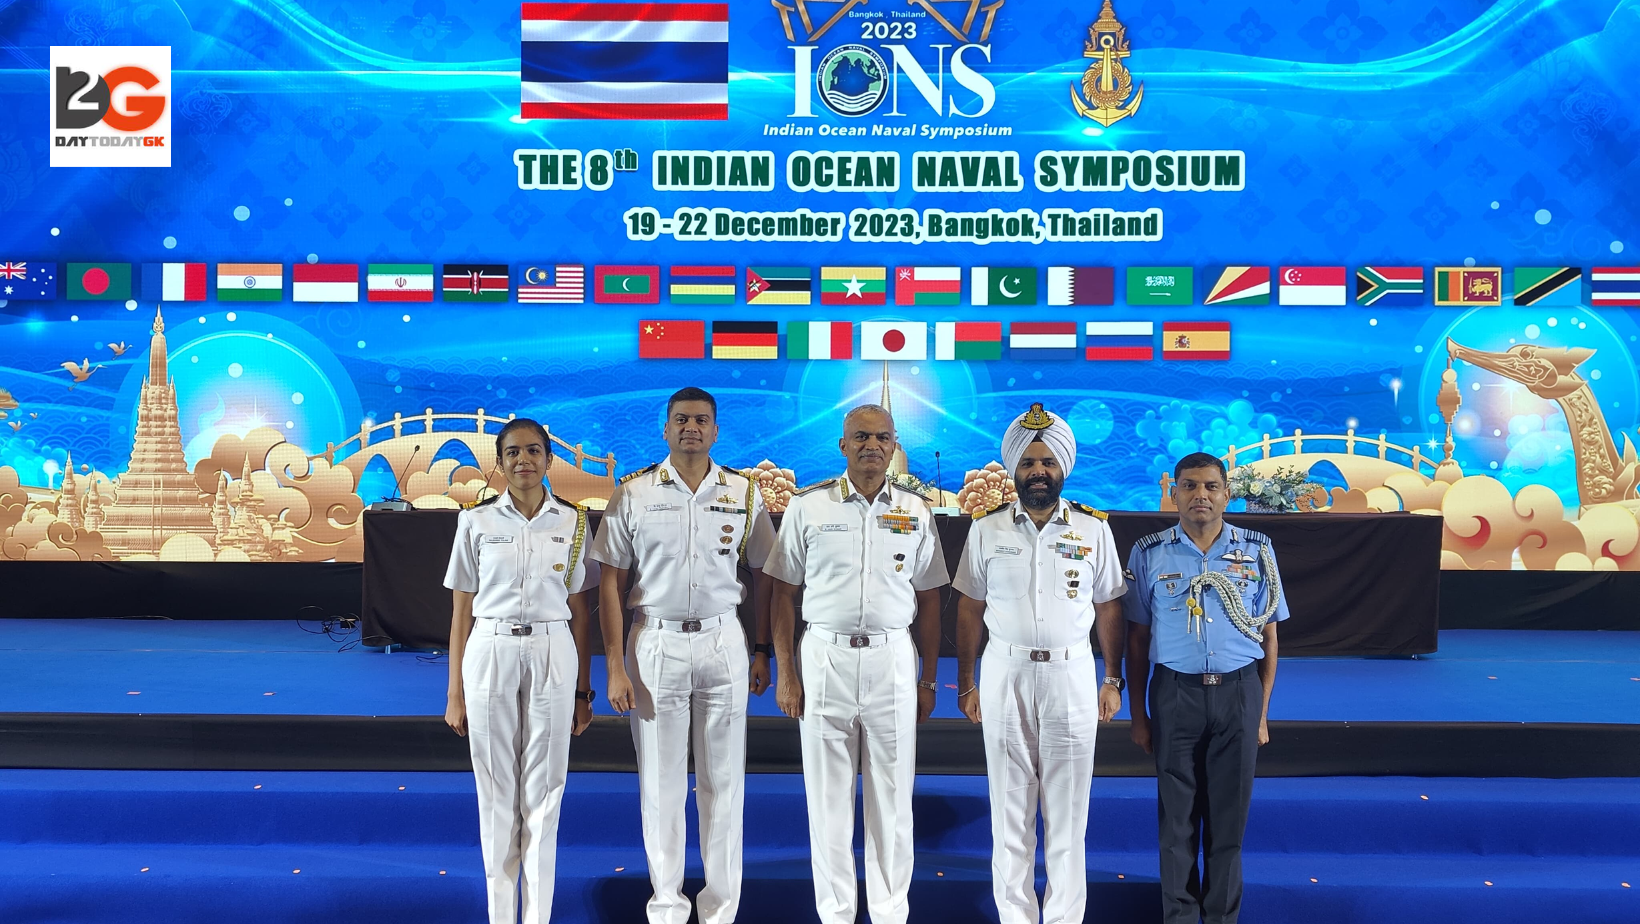 8th Indian Ocean Naval Symposium Conclave of Chiefs ends in Bangkok